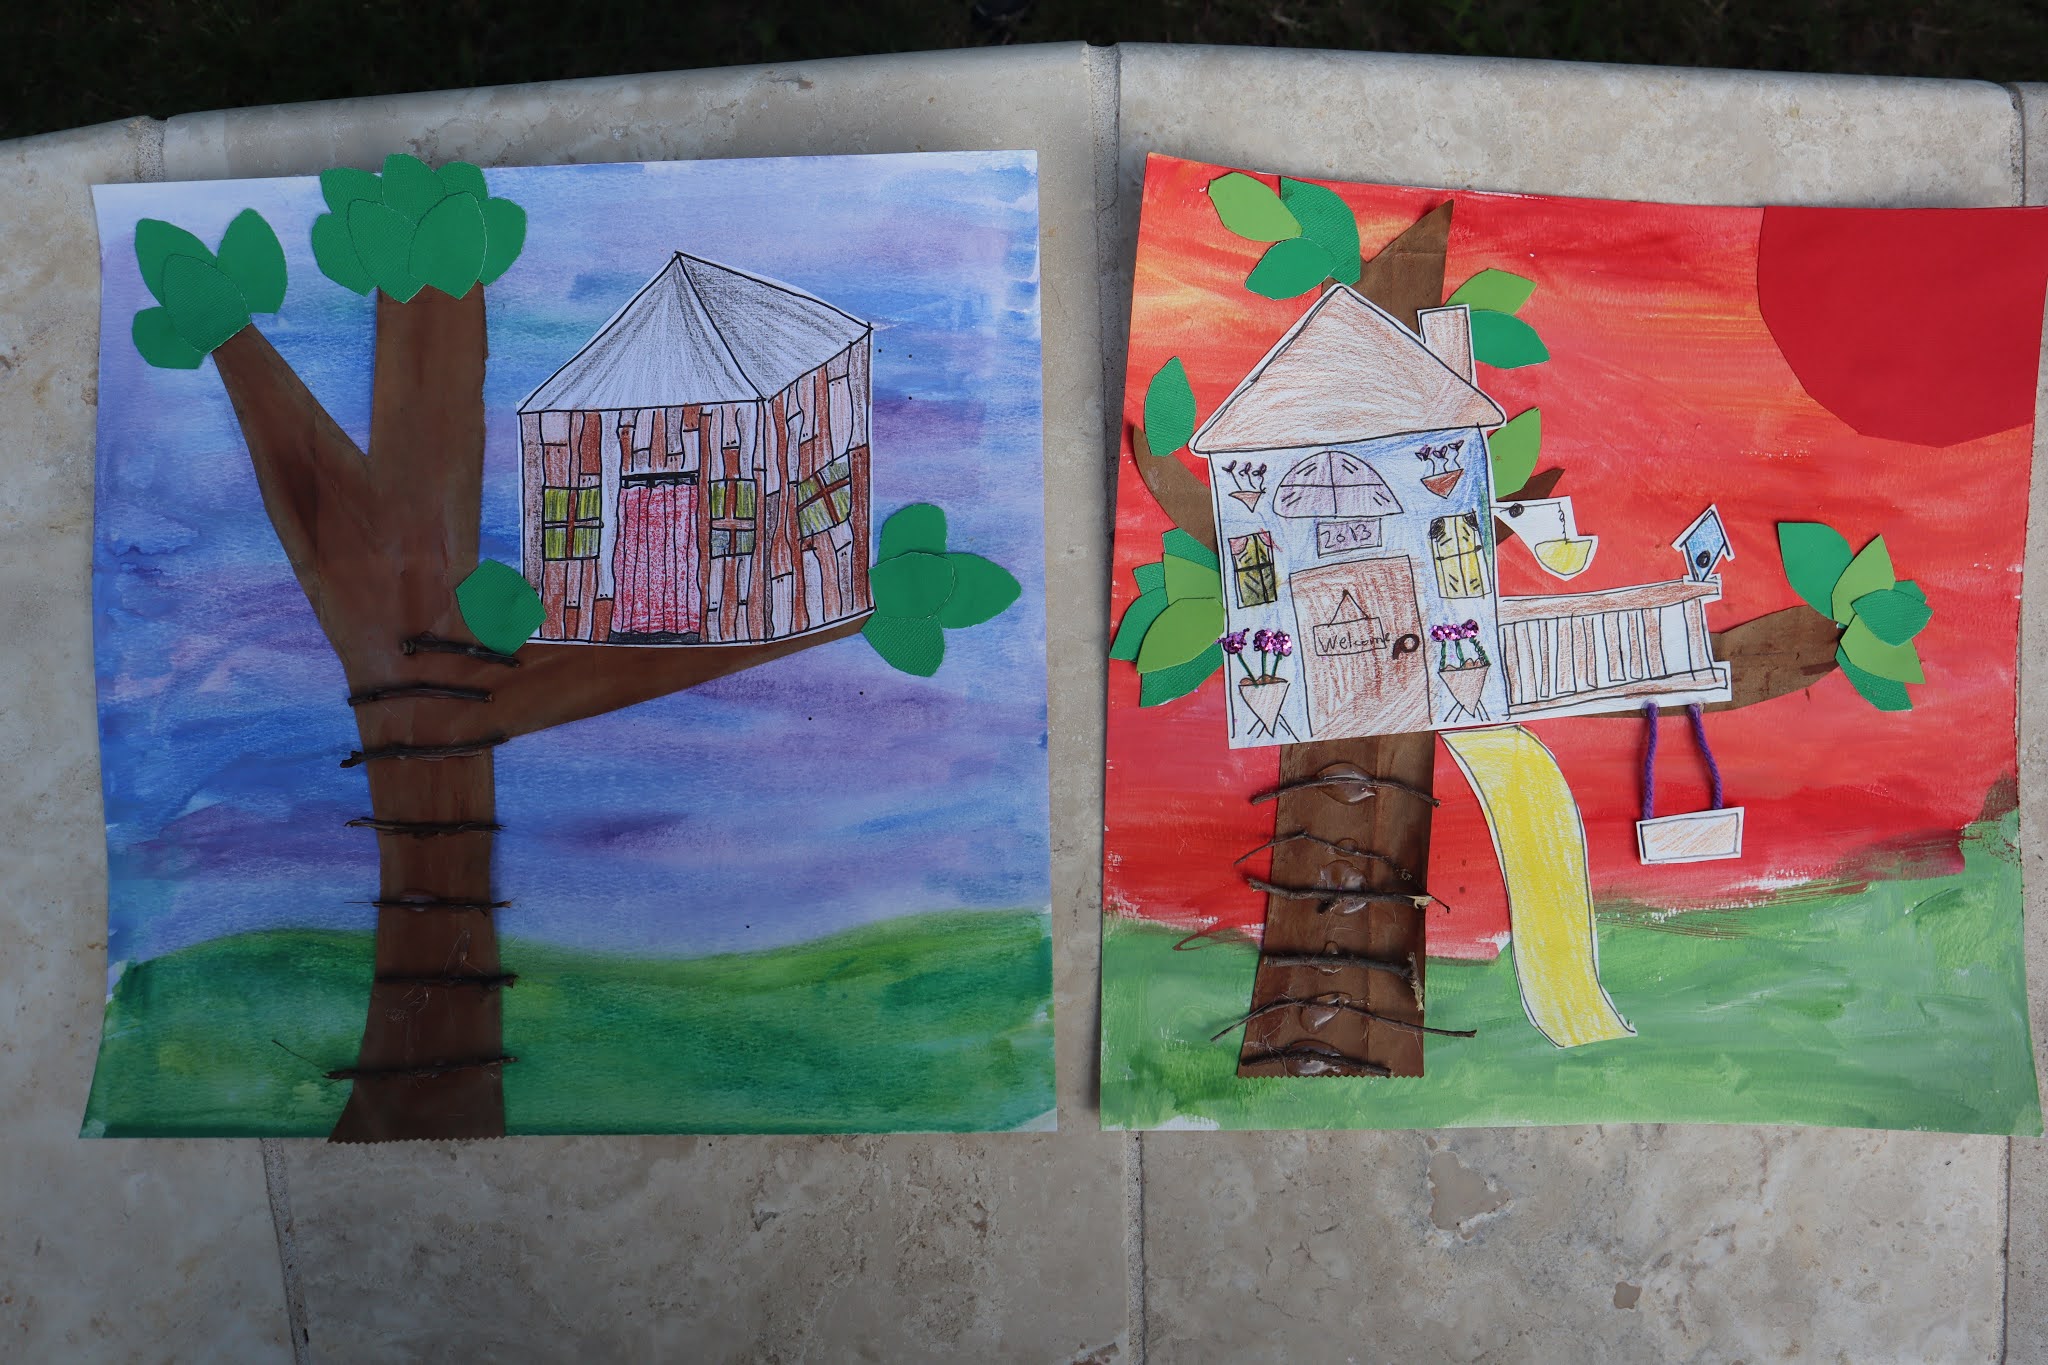 ART PANTRY ages 8-12 years - TREEHOUSE kid and craft